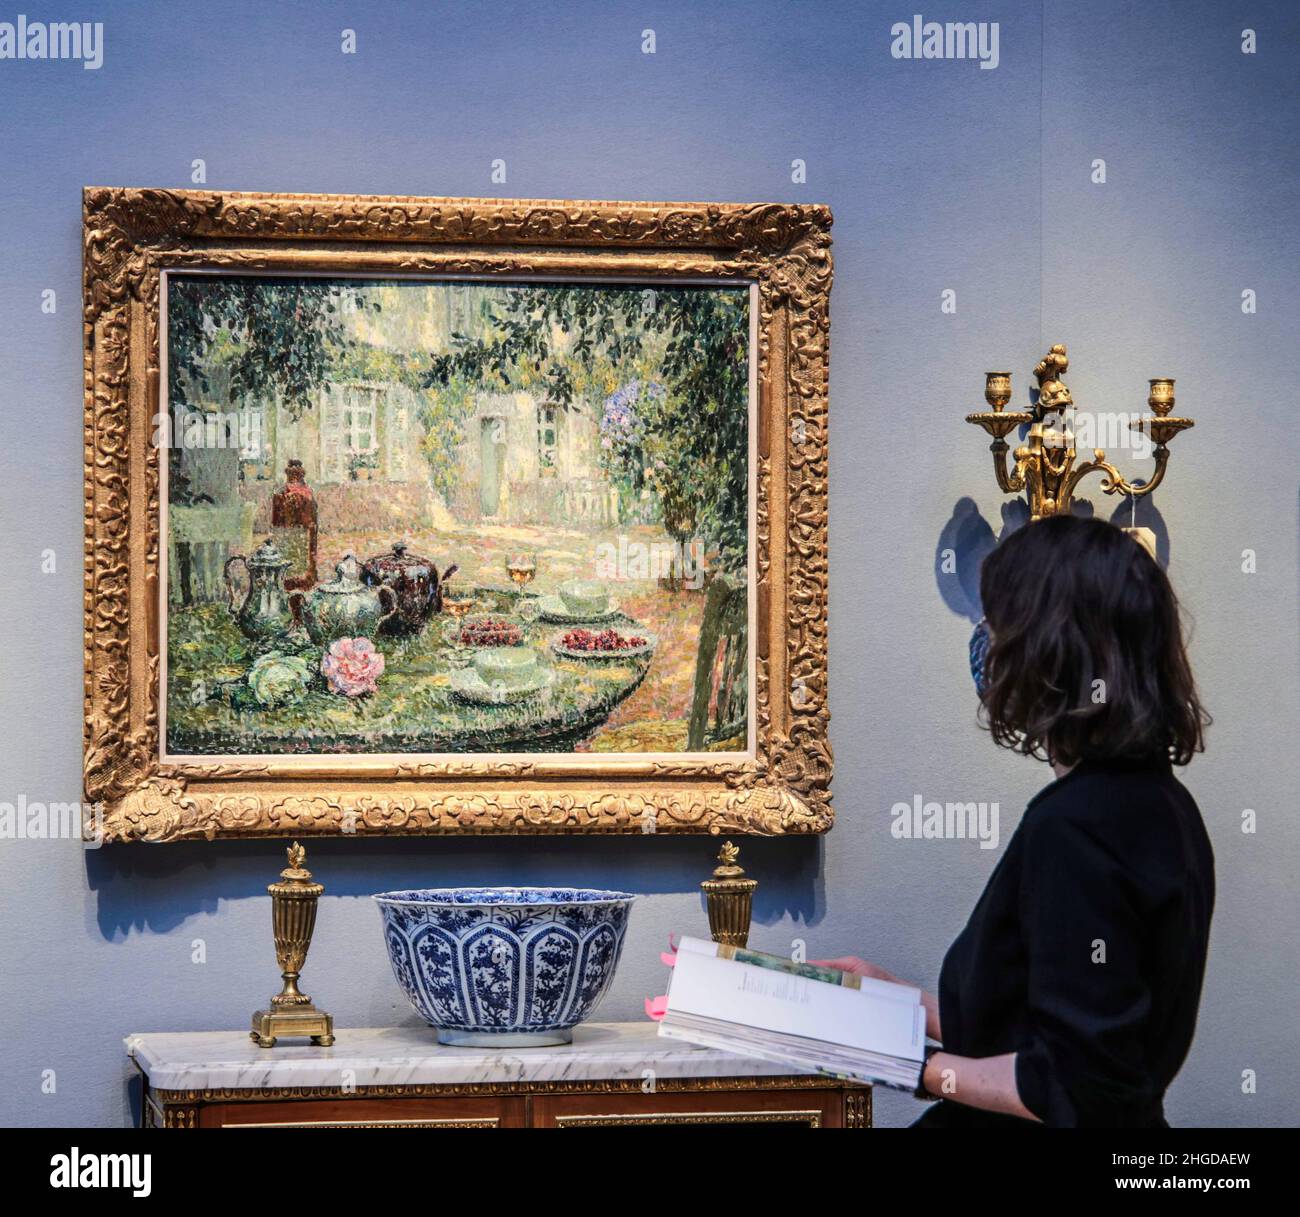 London UK 20 January 2022 Christie’s London unveil Au Bord Du Lac: An interior by François- Joseph Graf.  A serene garden scene painted at Gerberoy in 1917 by Henri Le Sidaner est£300,000-500,000, The collection features French decorative arts, furniture and paintings, predominantly from the late 19th century. Each room had a distinct identity and aesthetic, created by Graf for his clients without slavishly adhering to a particular style or period. Paul Quezada-Neiman/Alamy Live News Stock Photo